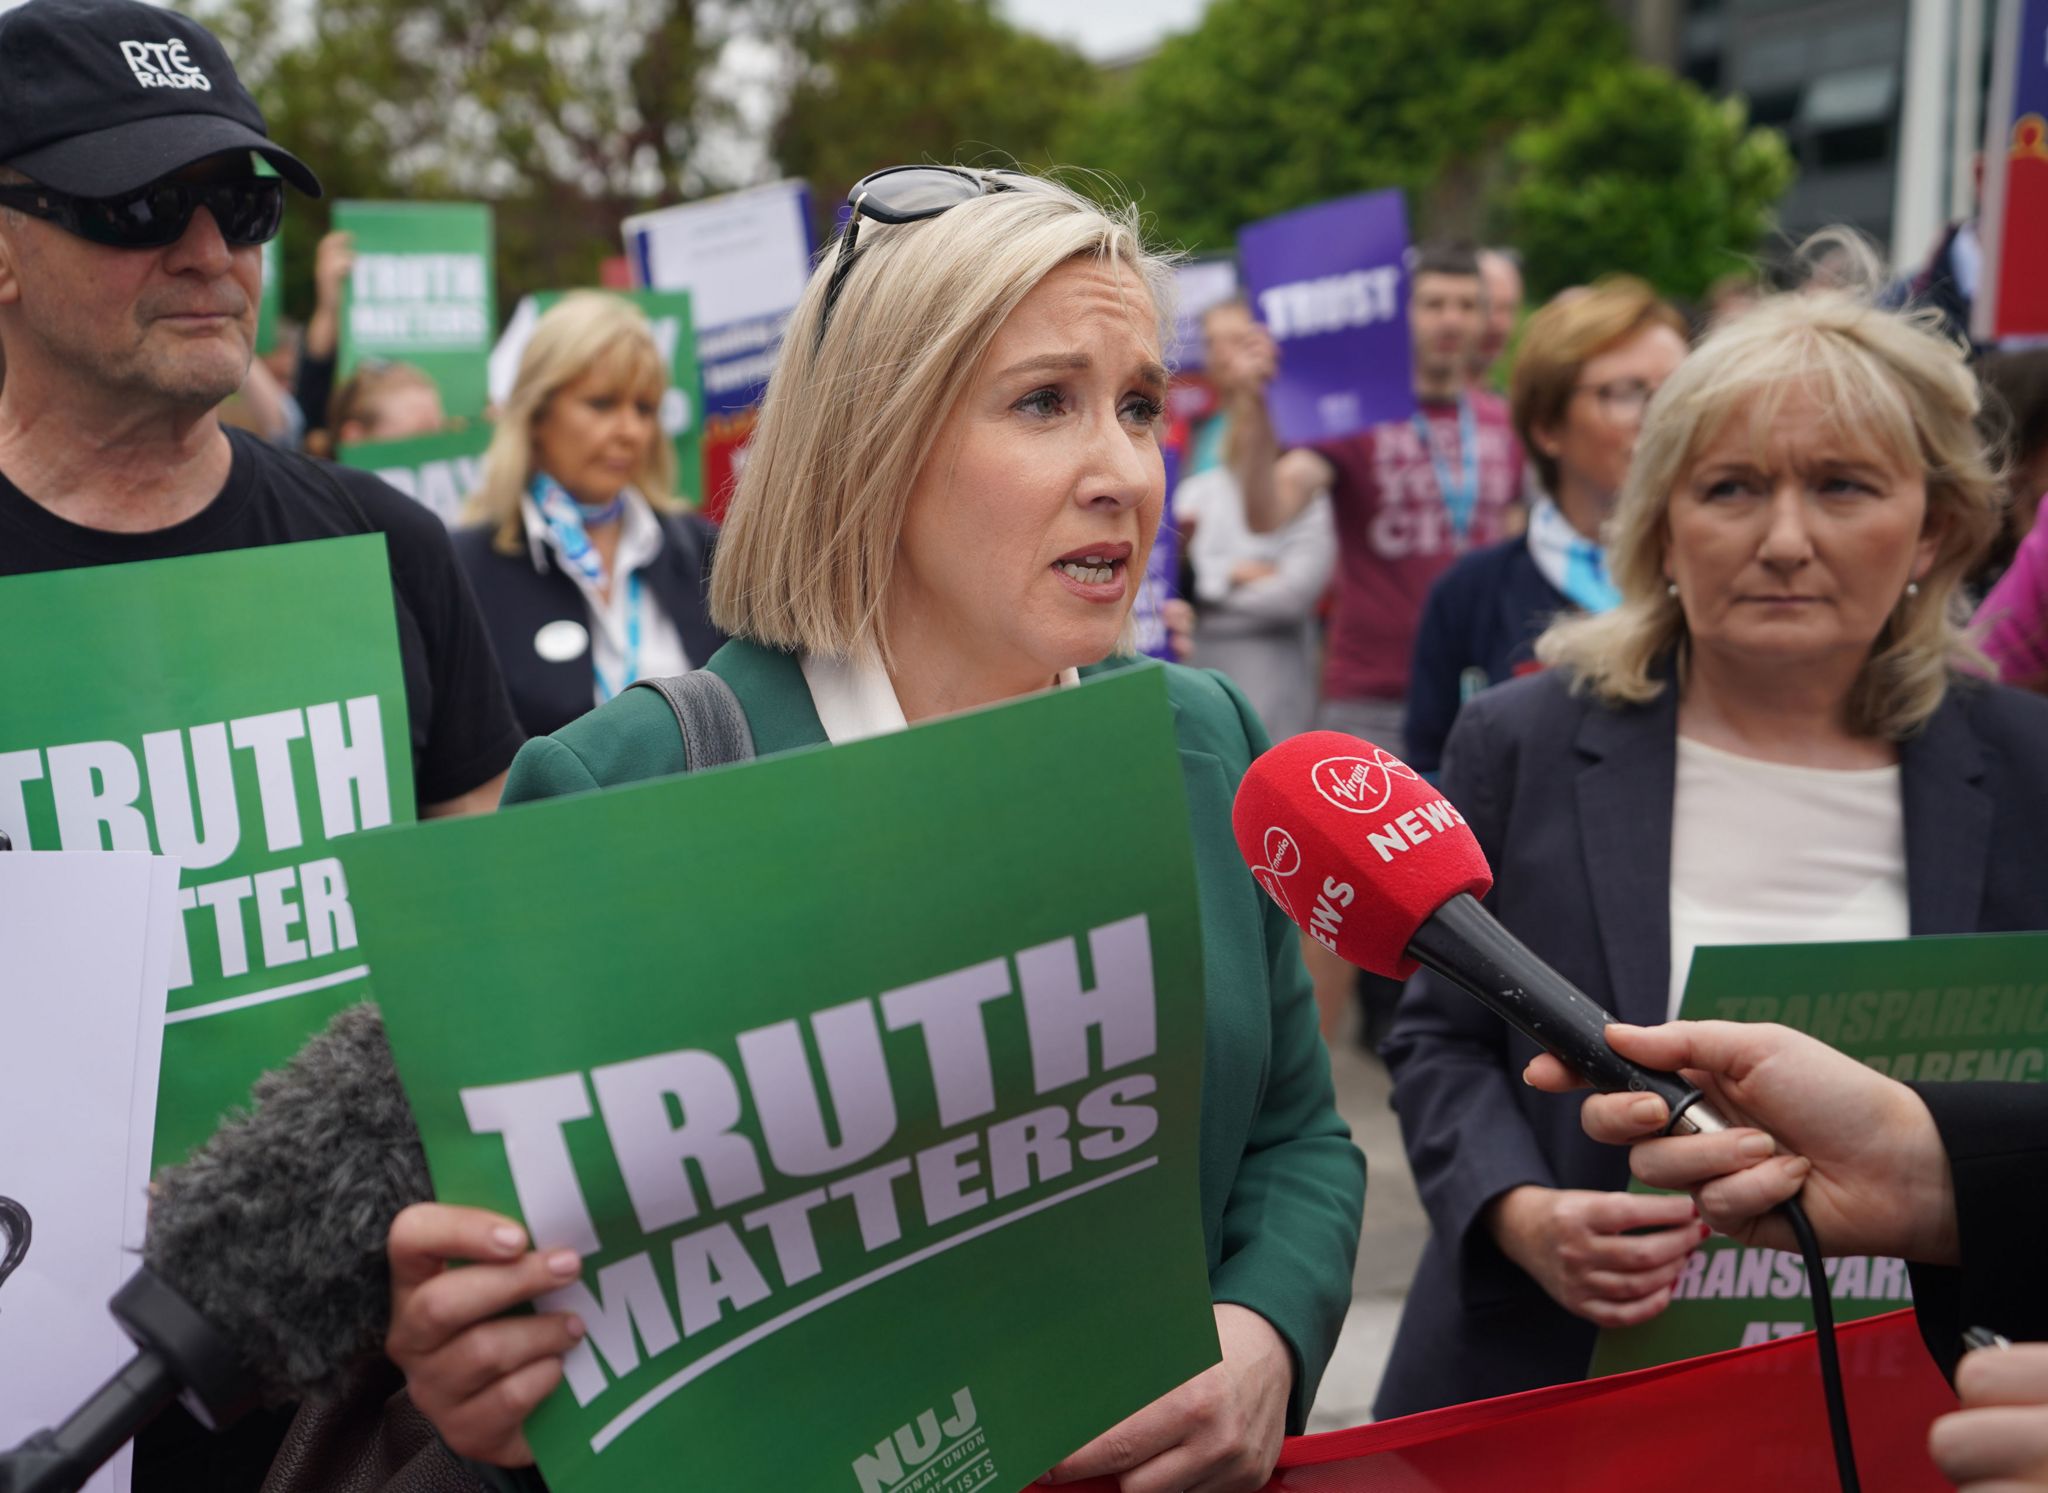 RTÉ staff on protest in the wake of the Ryan Tubridy controversy